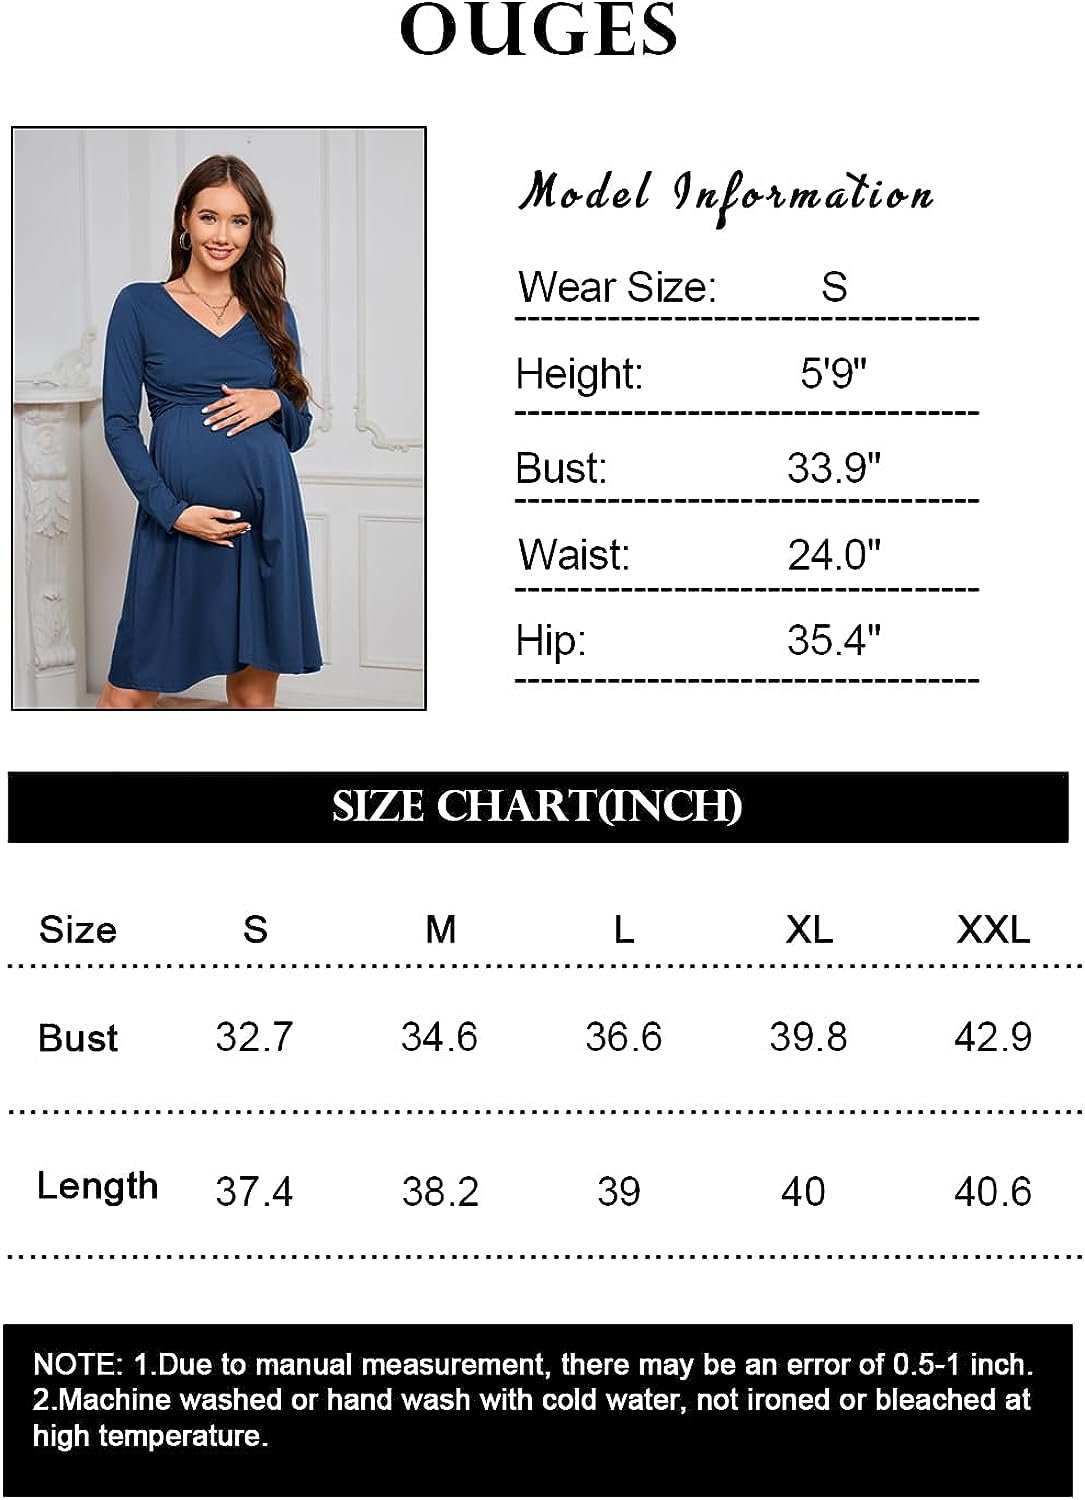 Comparing Maternity Tops, Dresses & Jeans: A Review